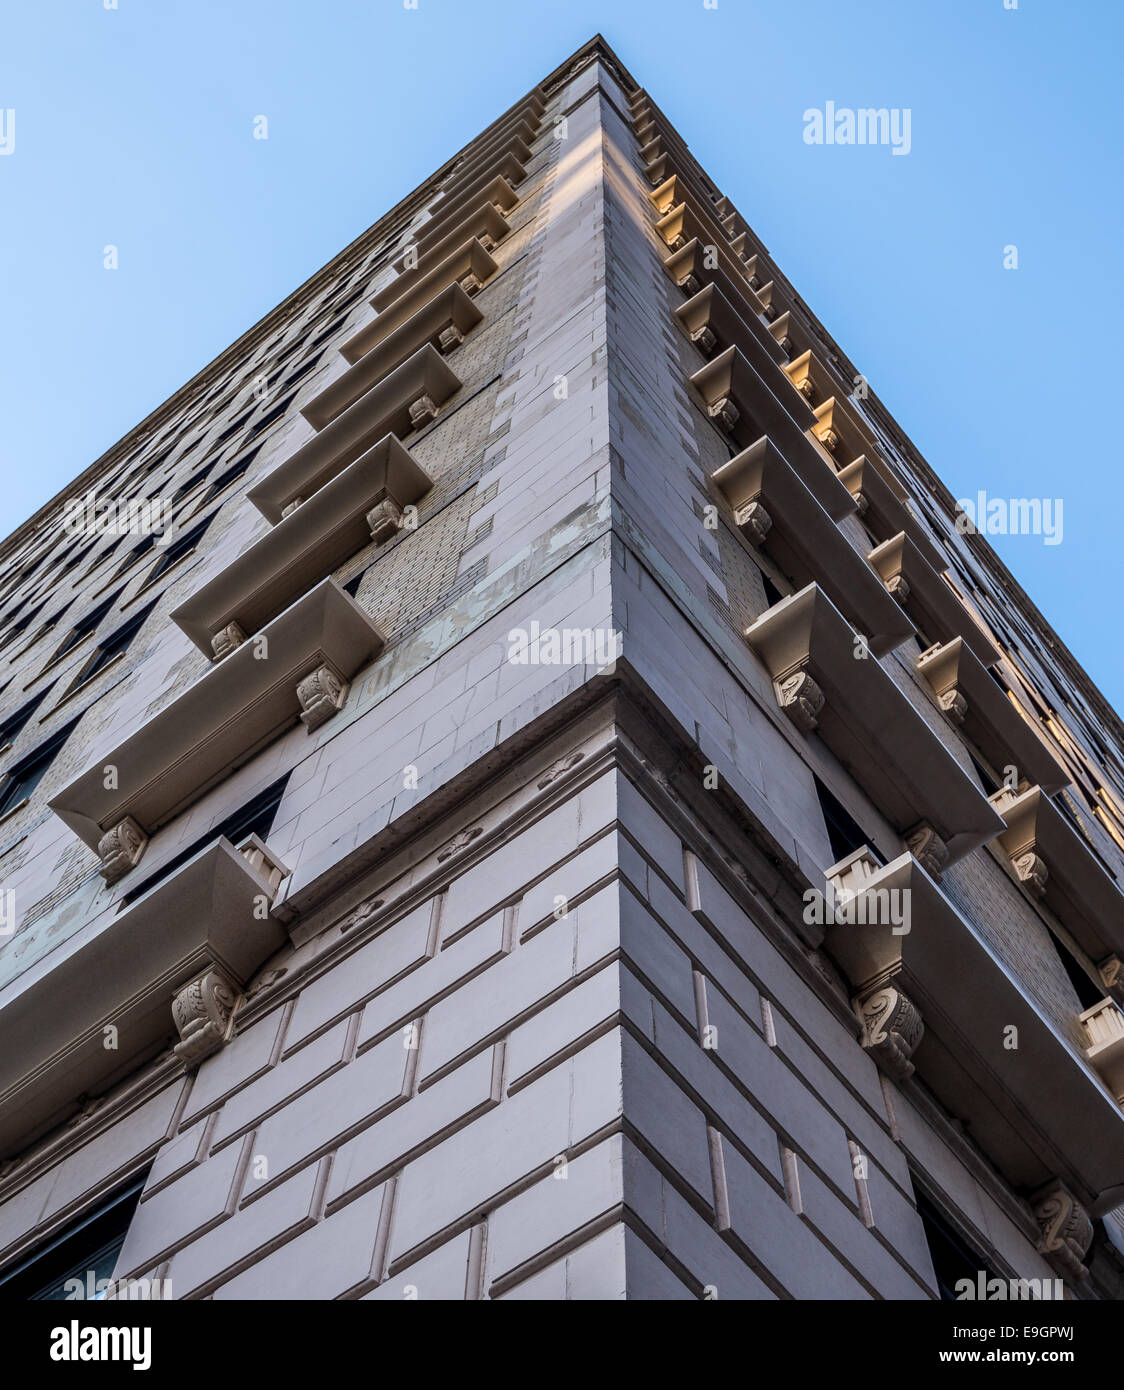 Looking up at the corner of a building. Stock Photo